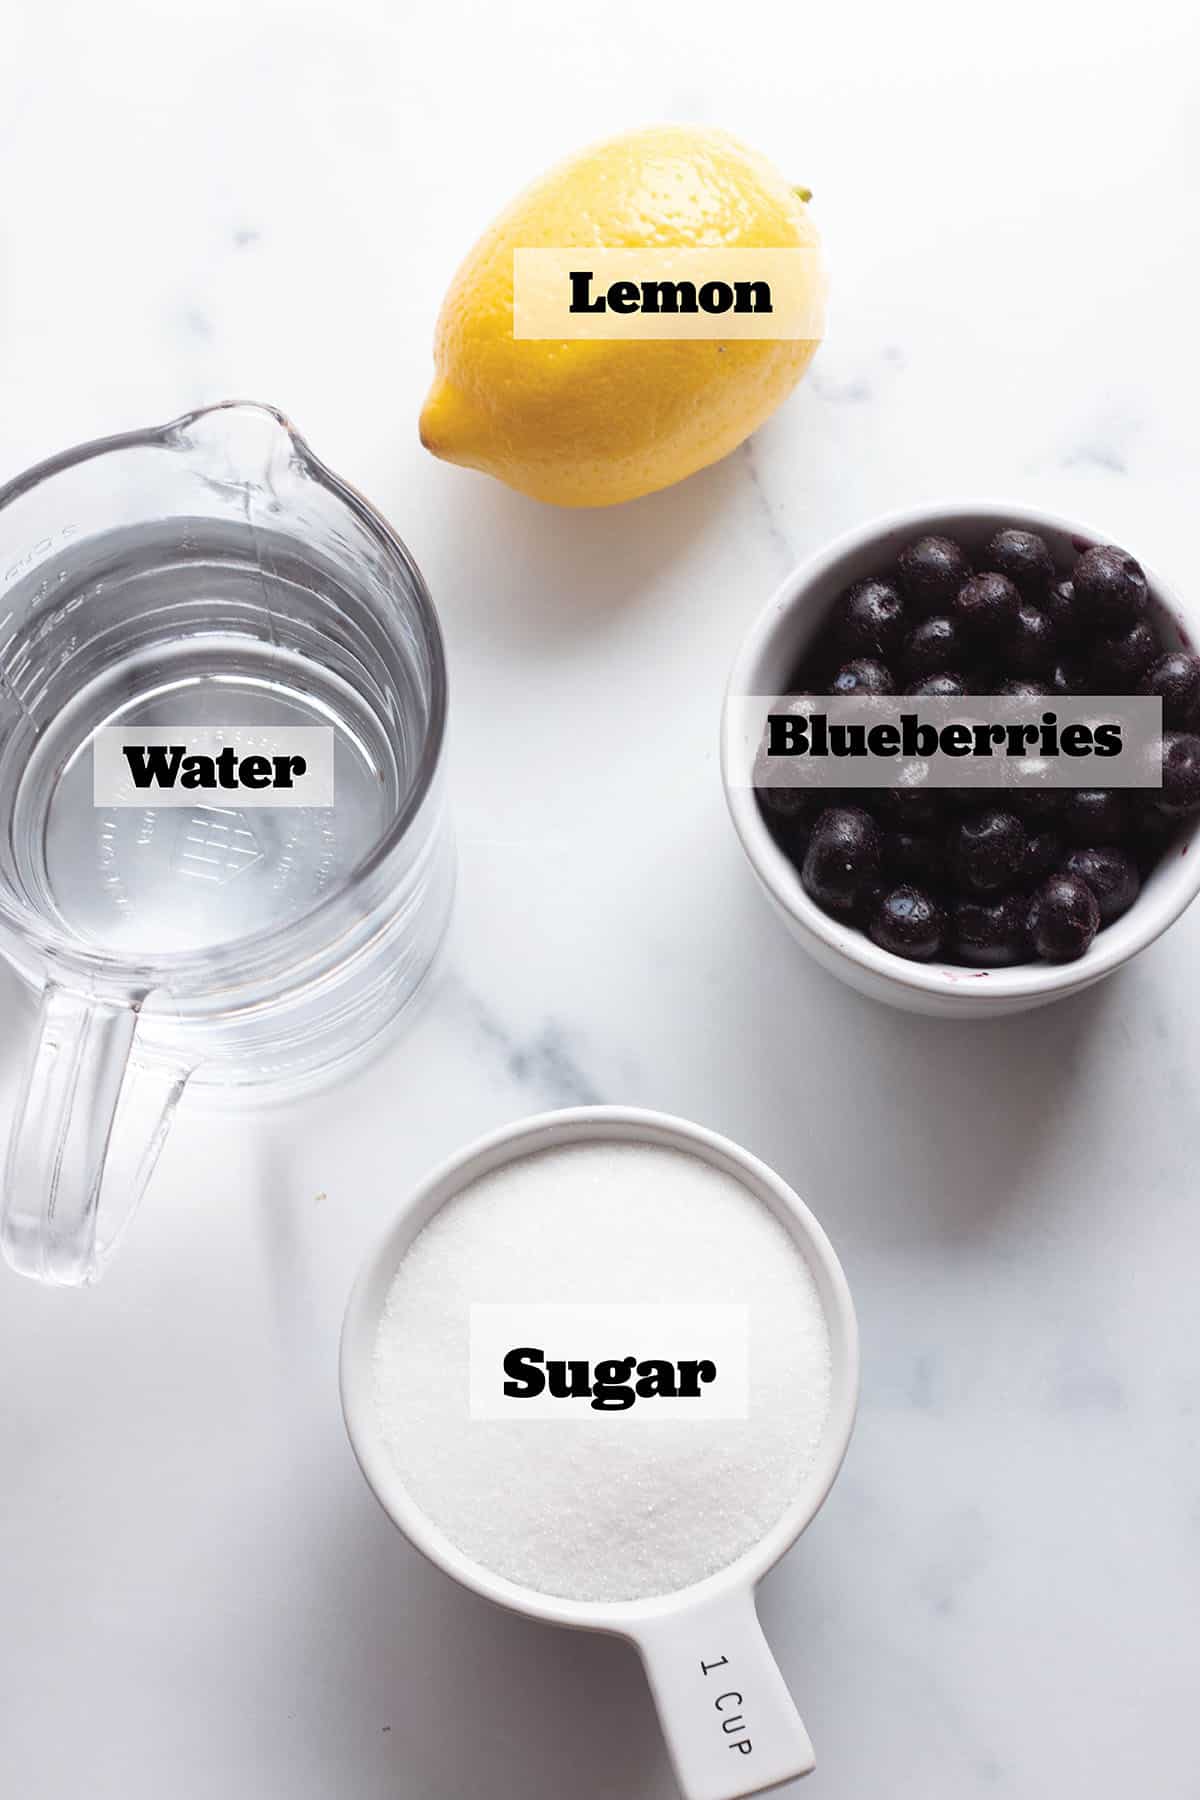 A cup of water, sugar, blueberries and a fresh lemon.